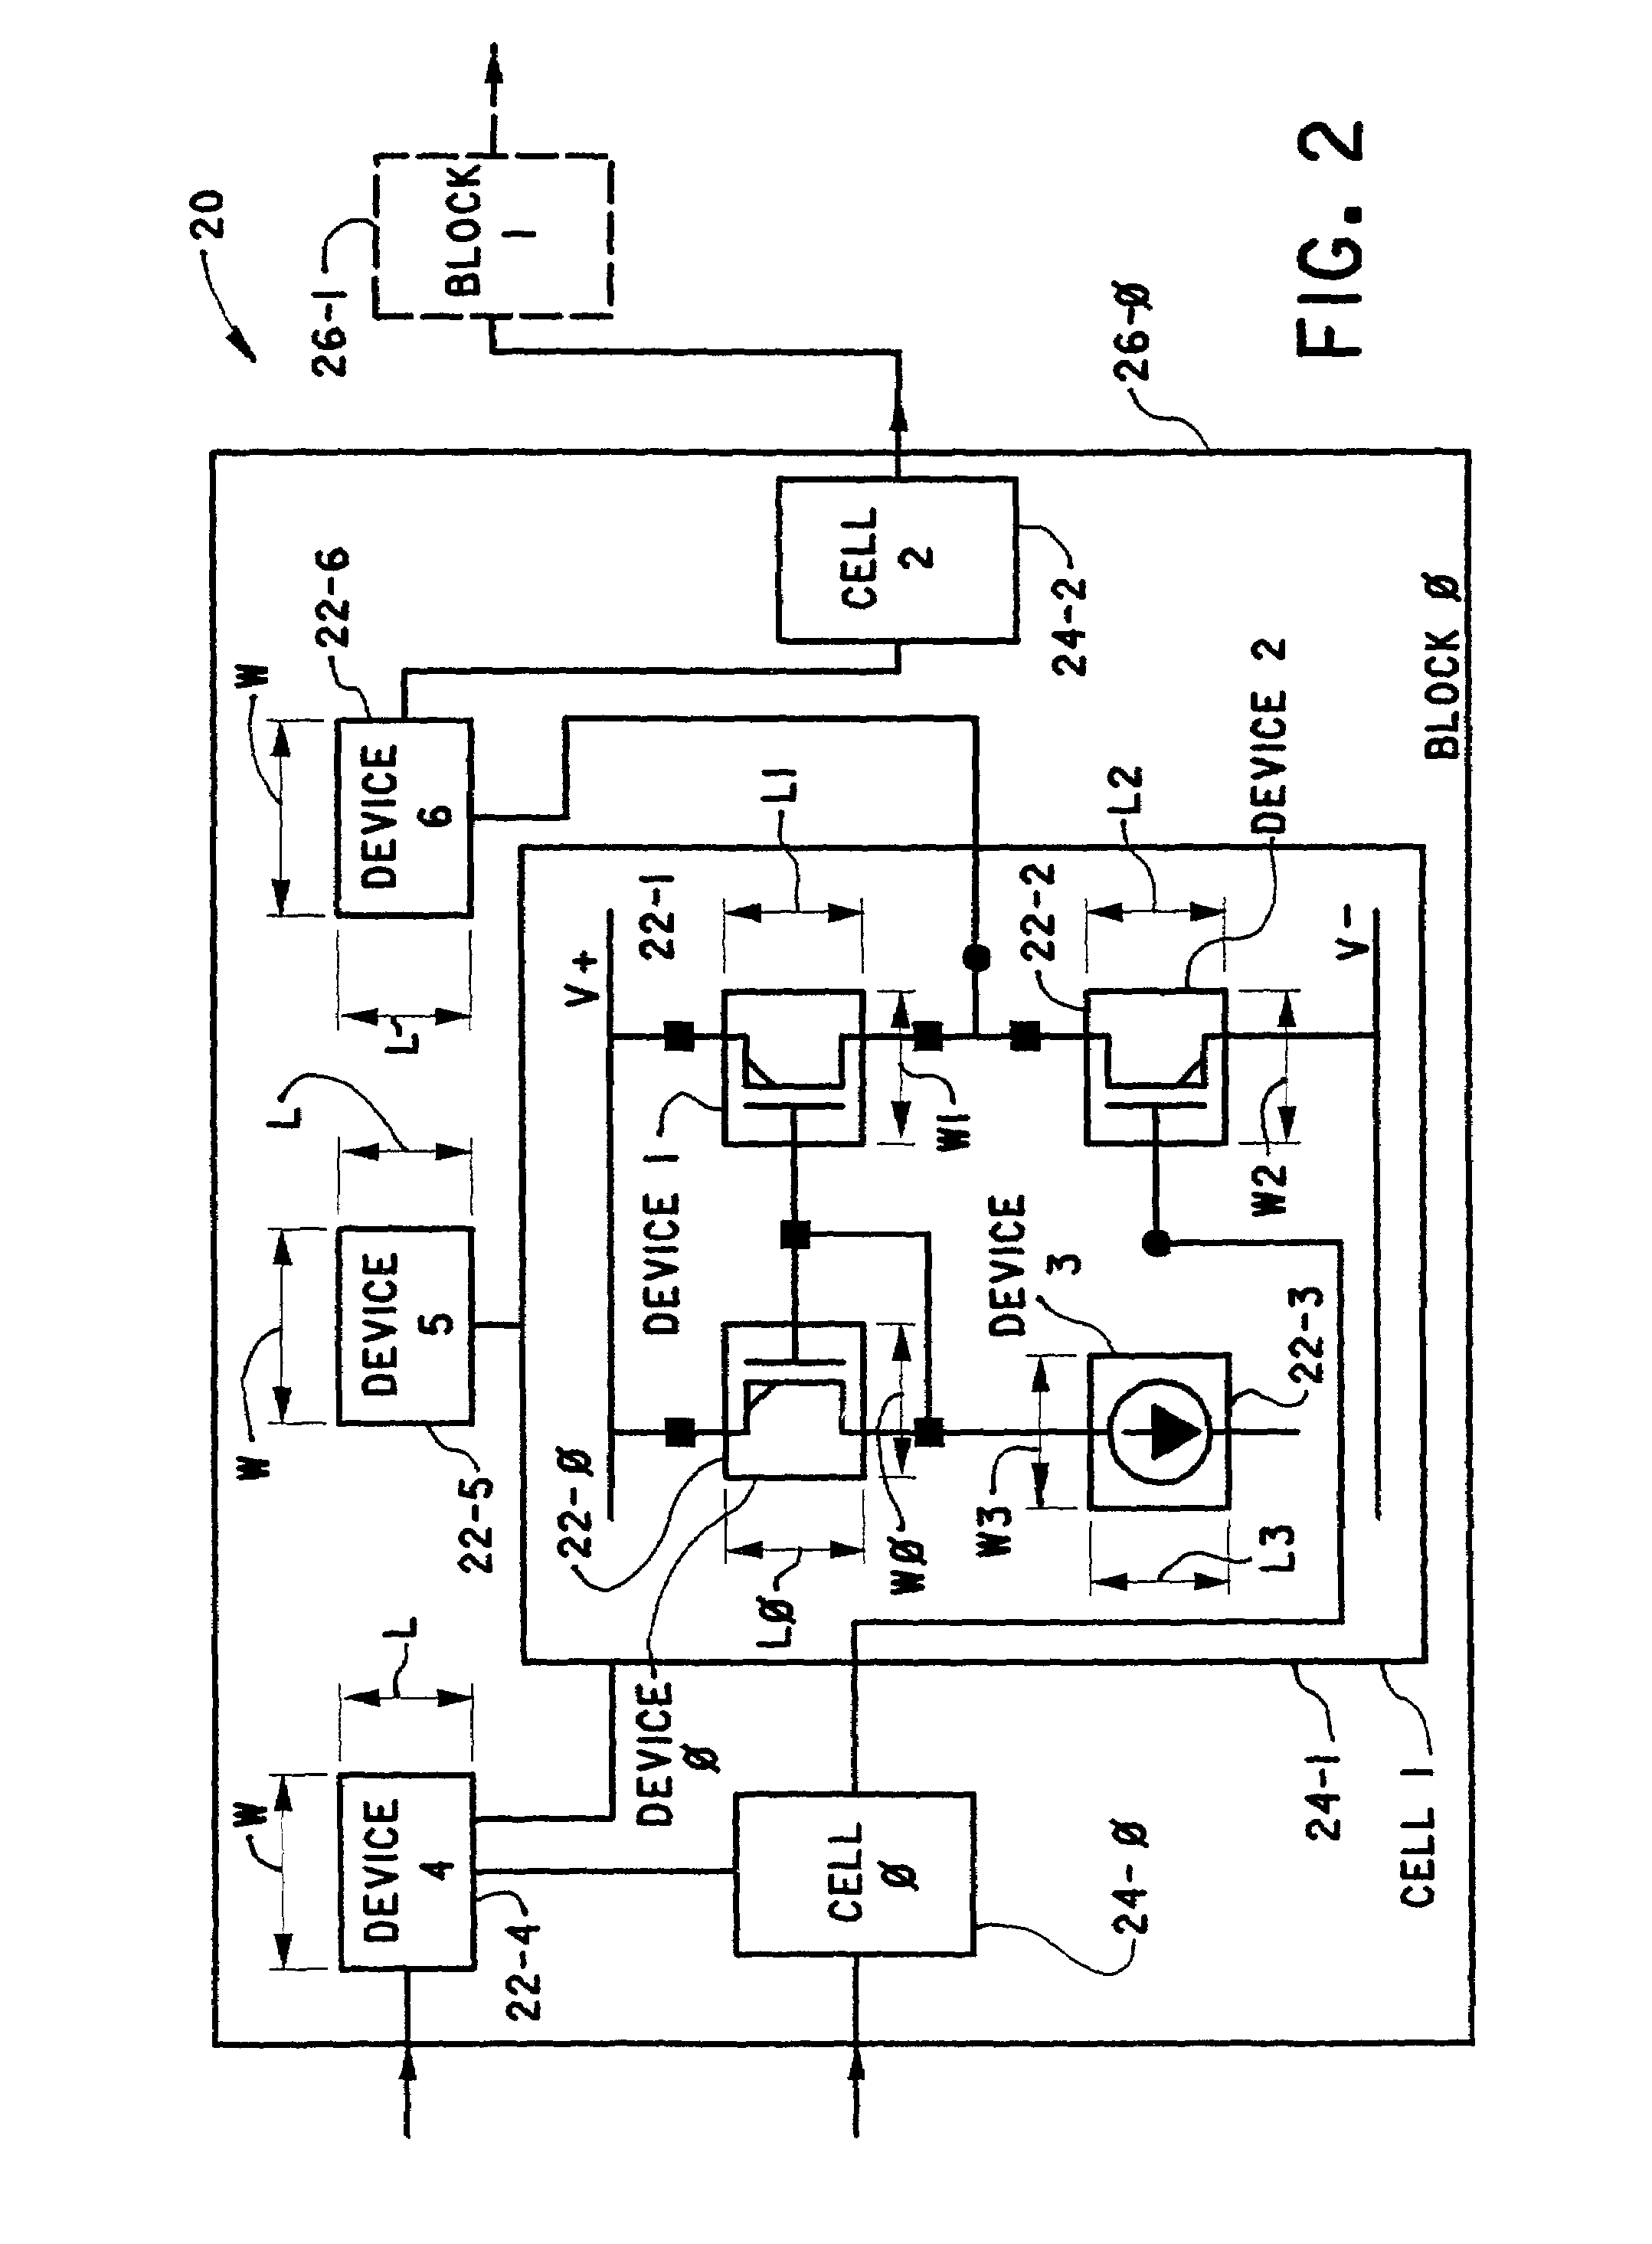 Method for automatically sizing and biasing circuits by means of a database